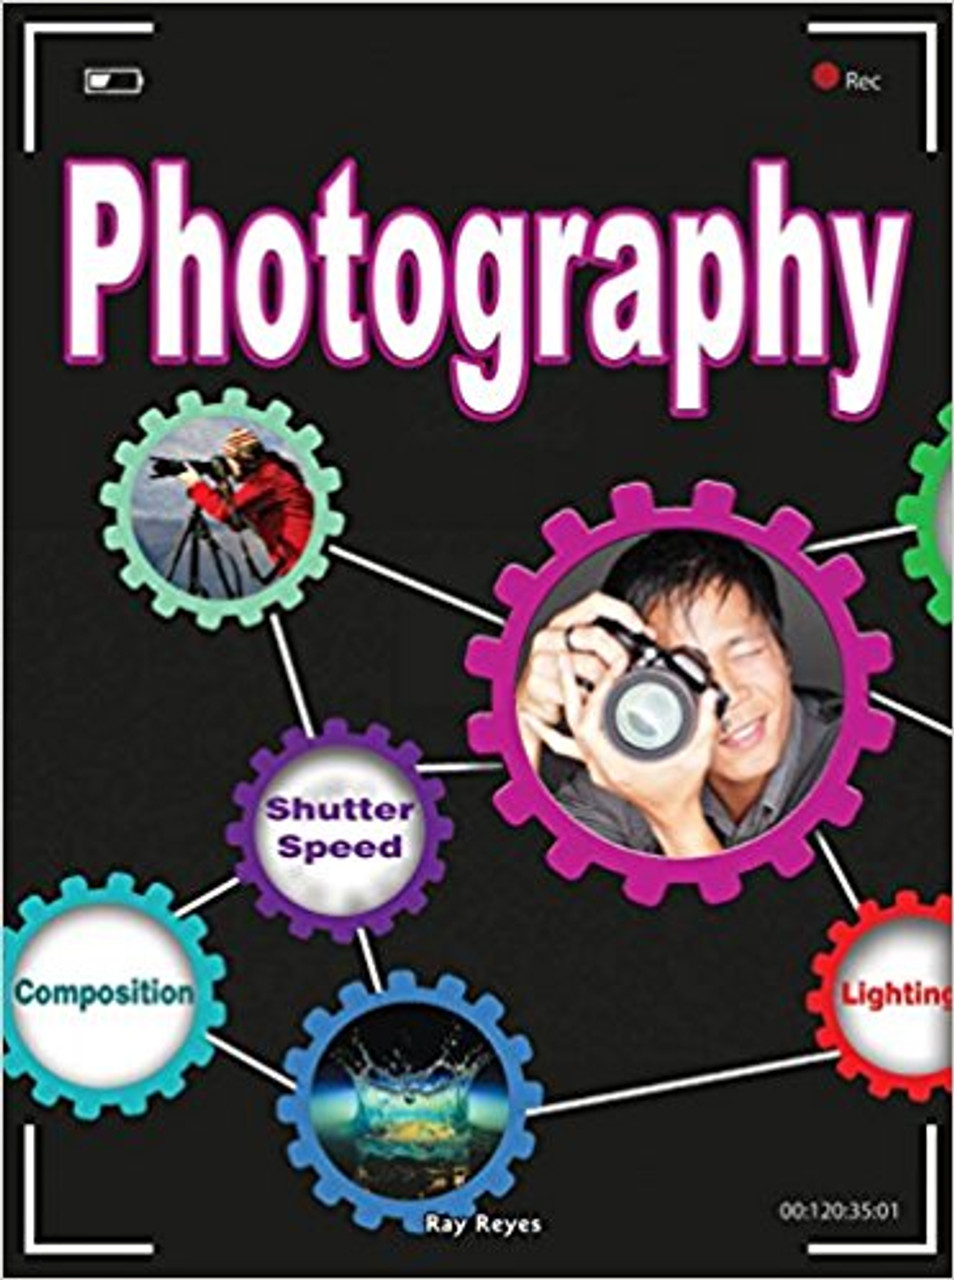  Photography is the focus of this STEAM driven title in the world of photography. Focusing on the improvements of equipment.